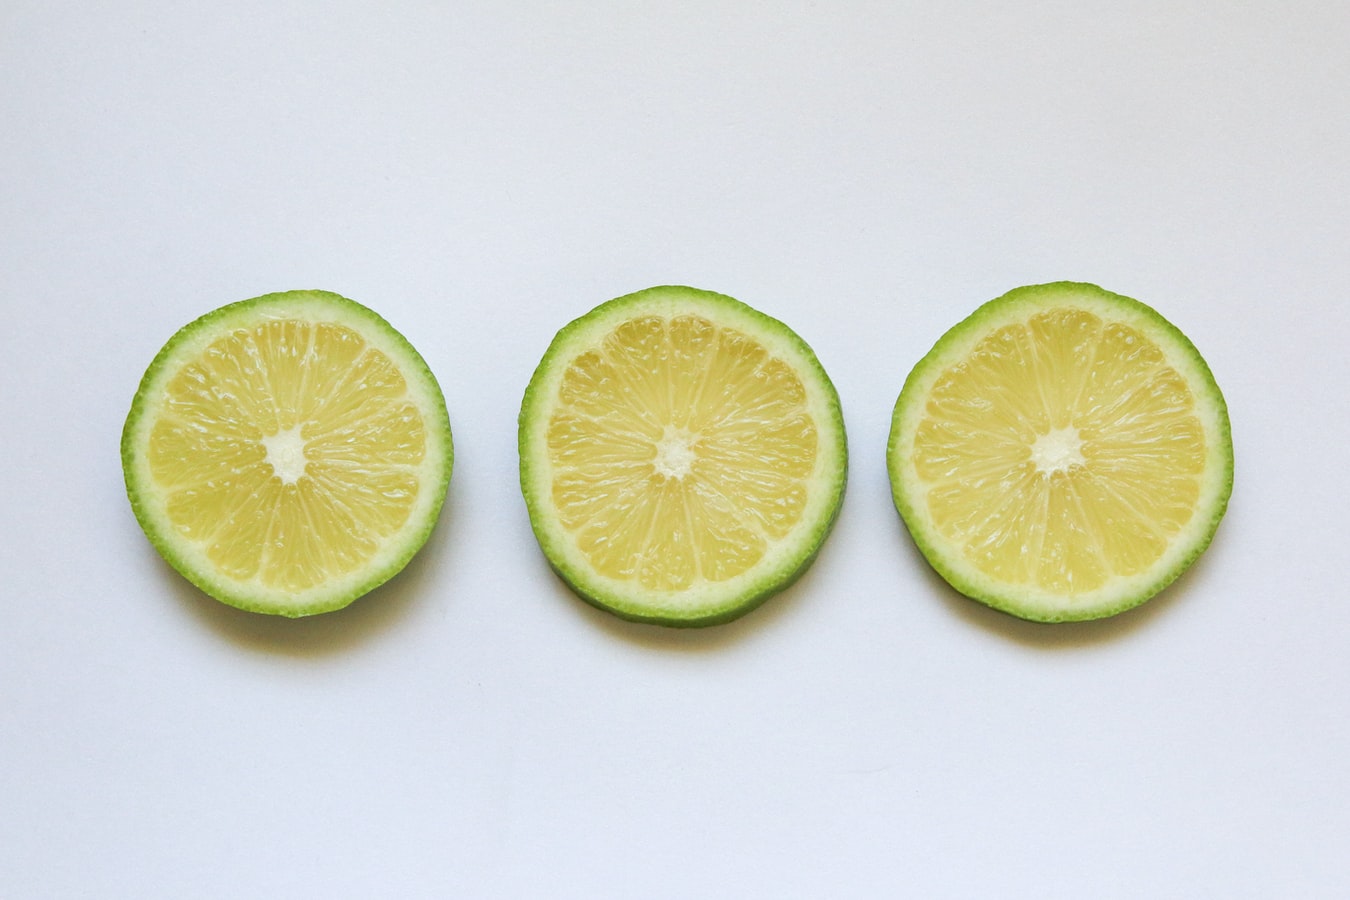 Lime essential oil has a variety of benefits from boosting mood and treating skin ailments